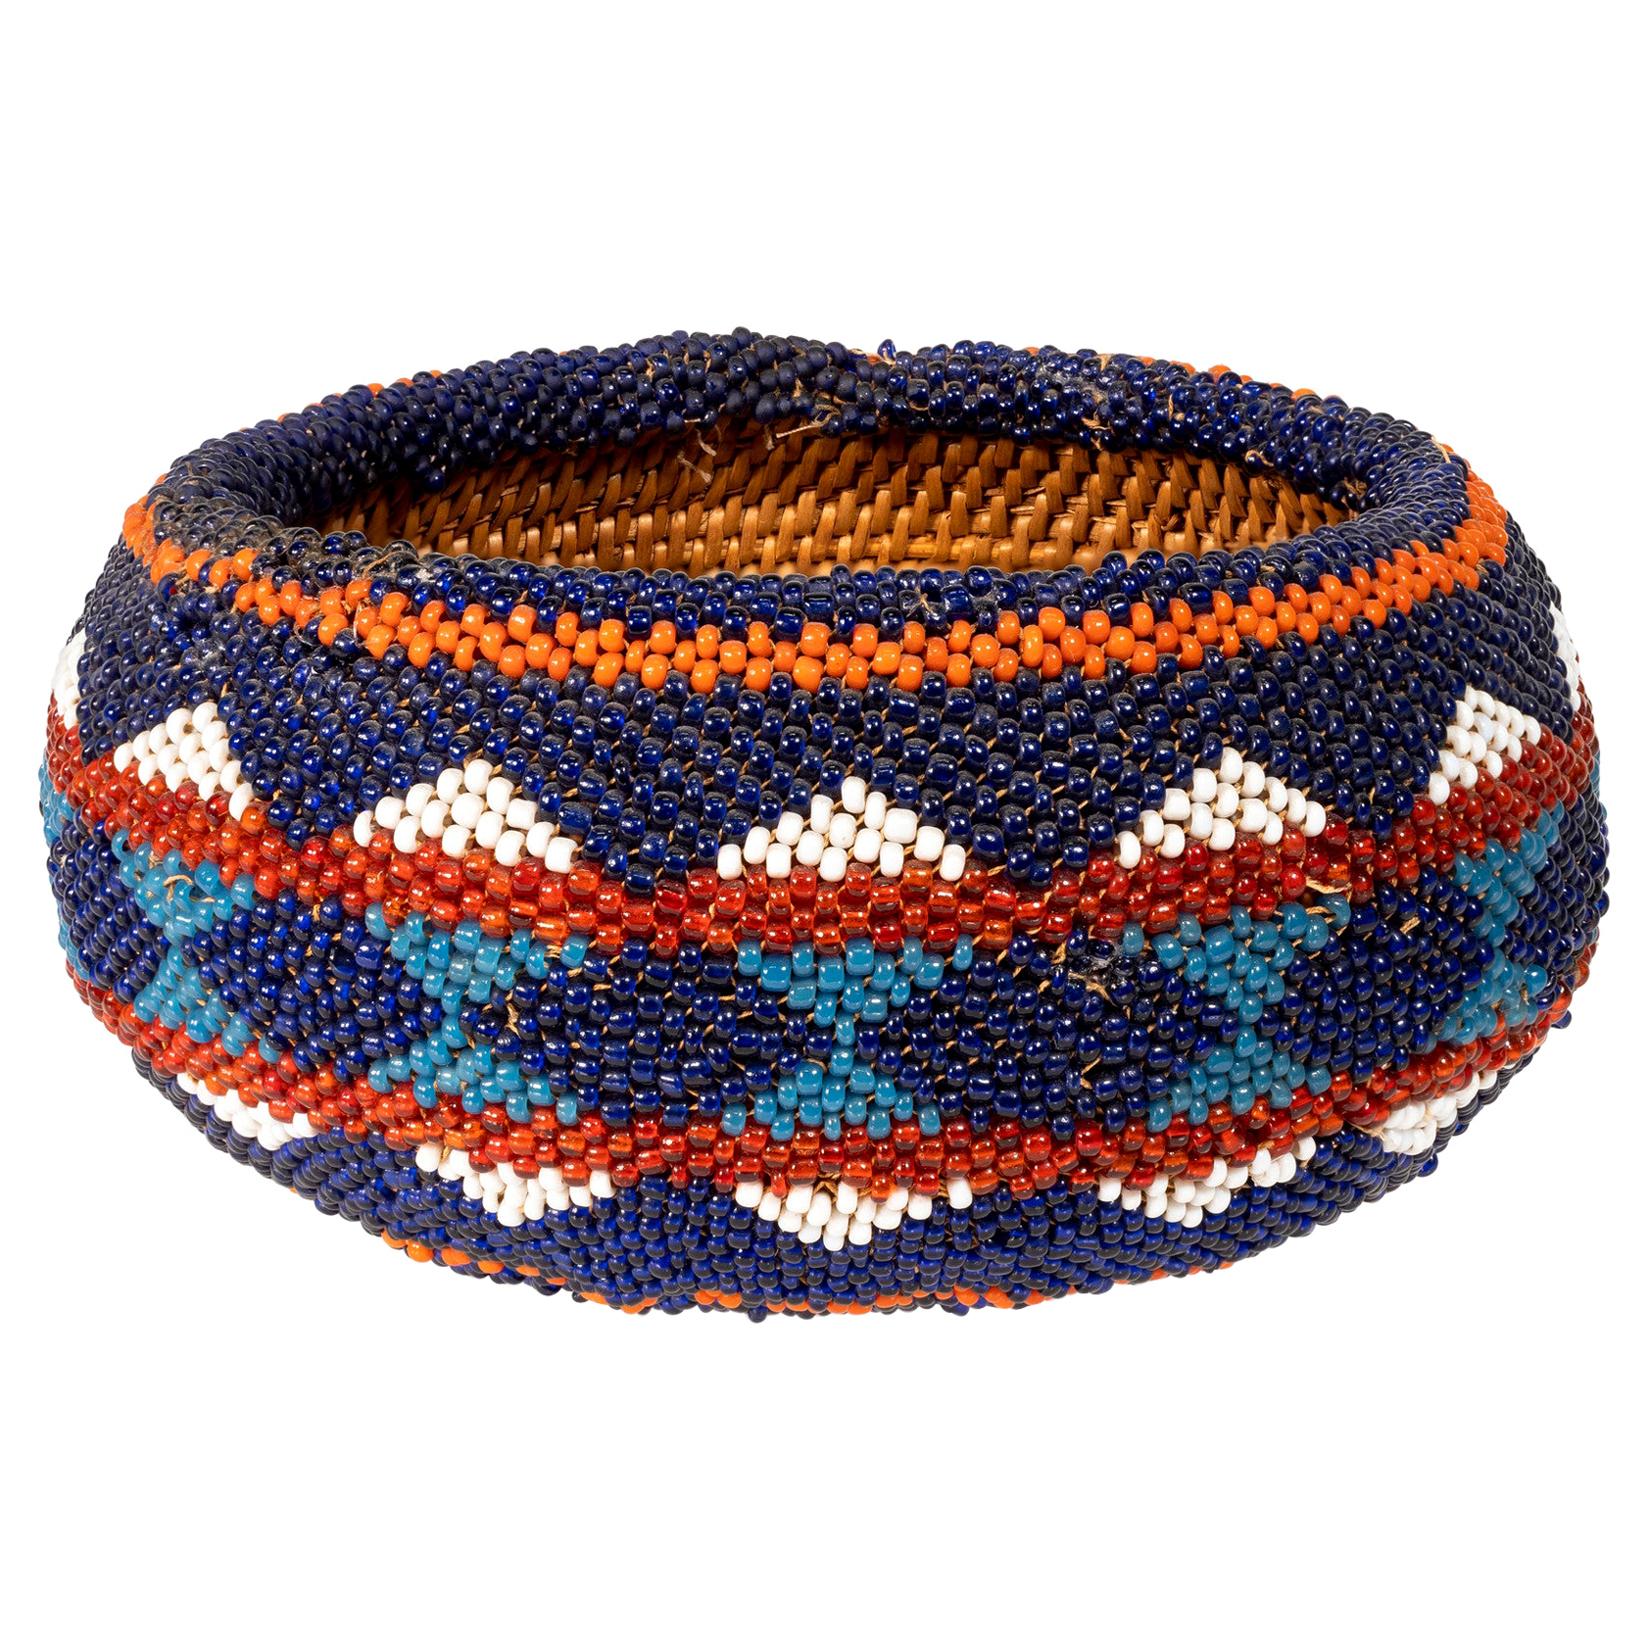 Small Beaded Washoe Basket For Sale